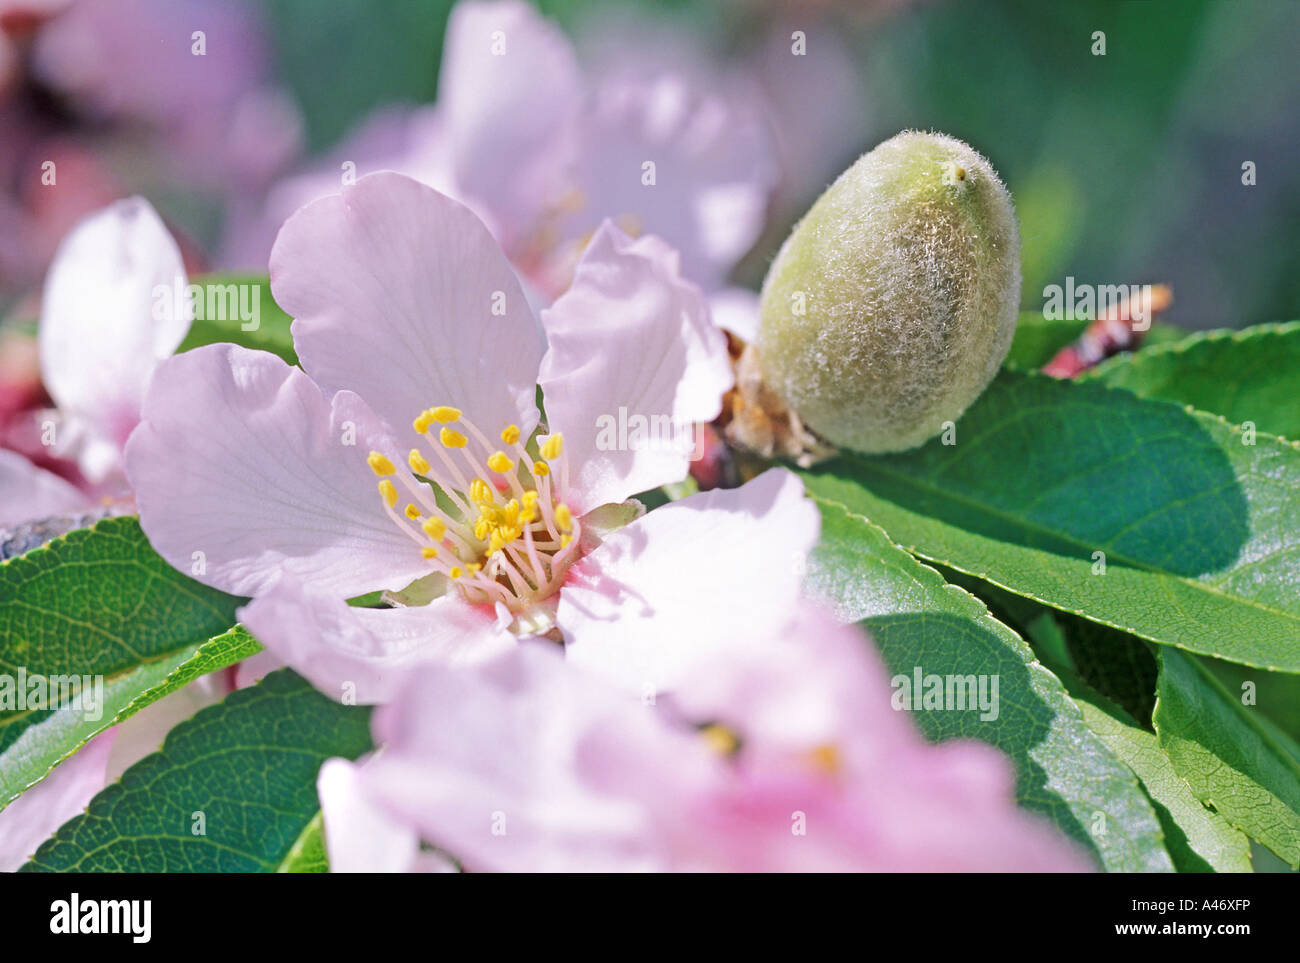 Almond blossoms in Spain, spring time. Stock Photo